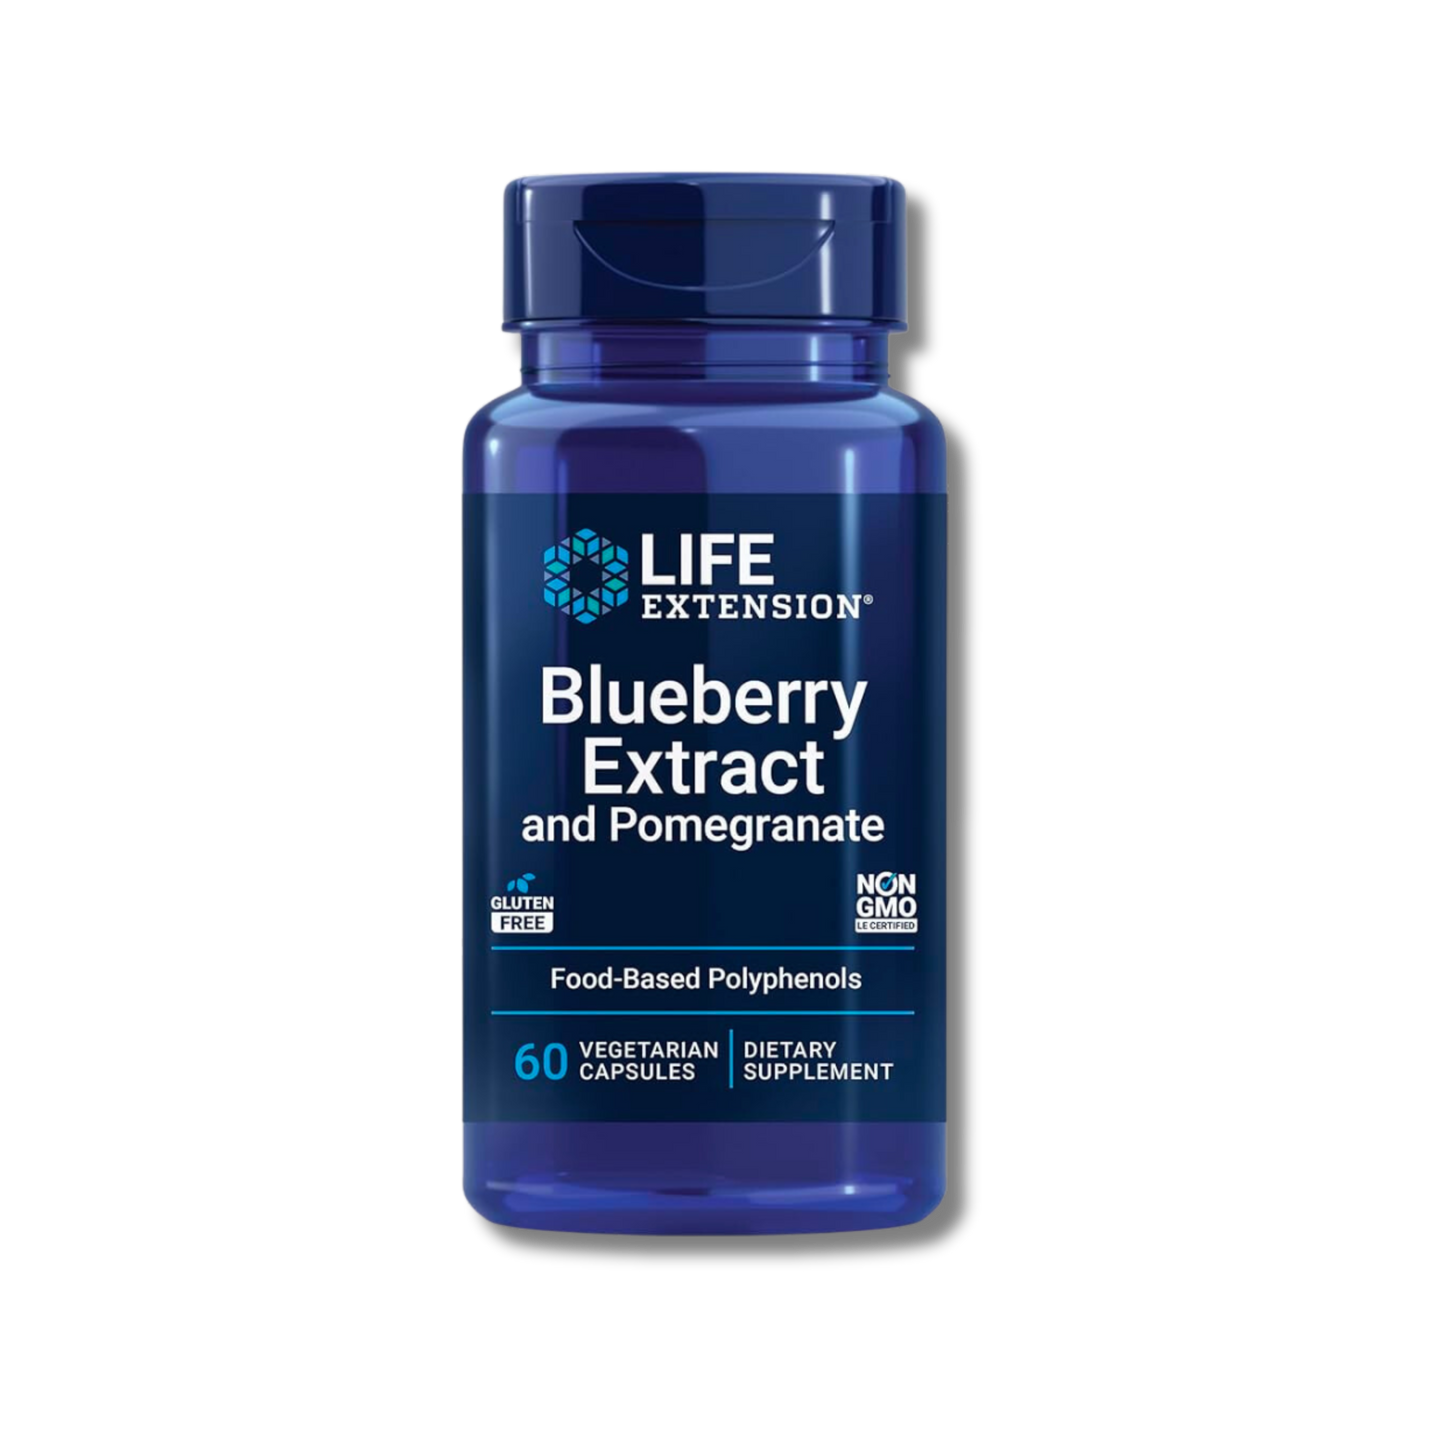 Blueberry Extract and Pomegranate